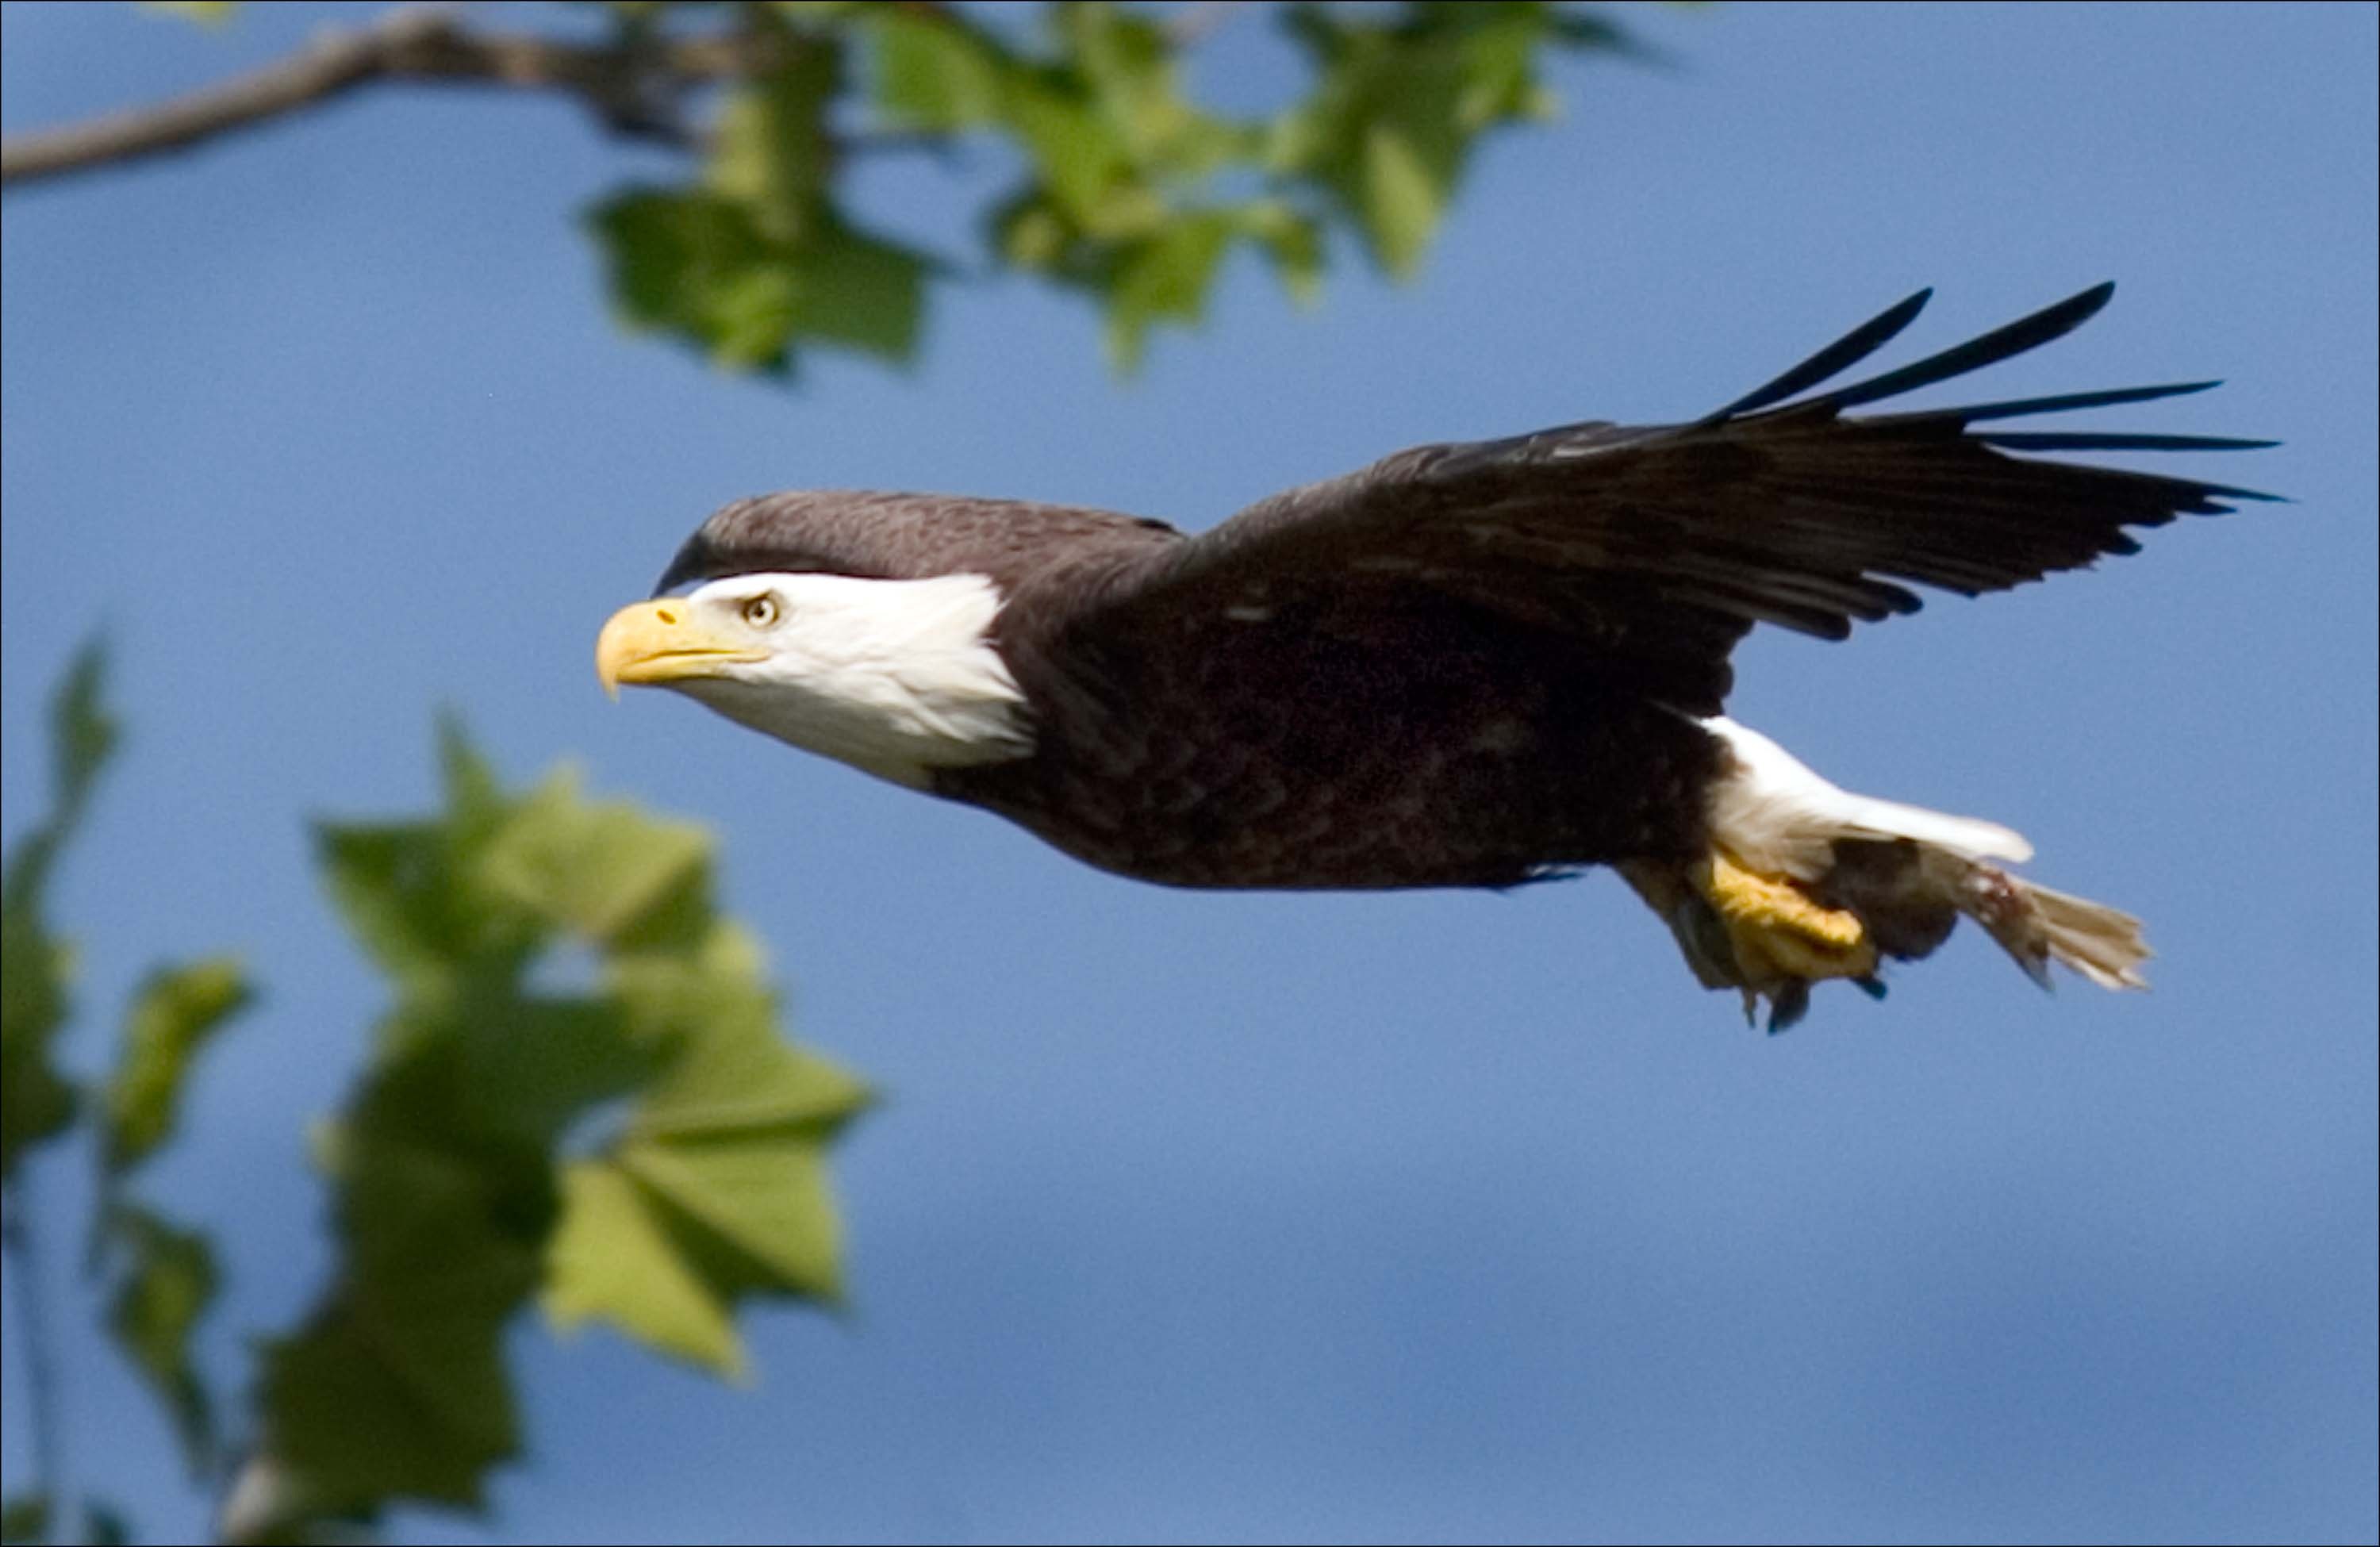 Flight of a white-headed eagle against the background of tree branches